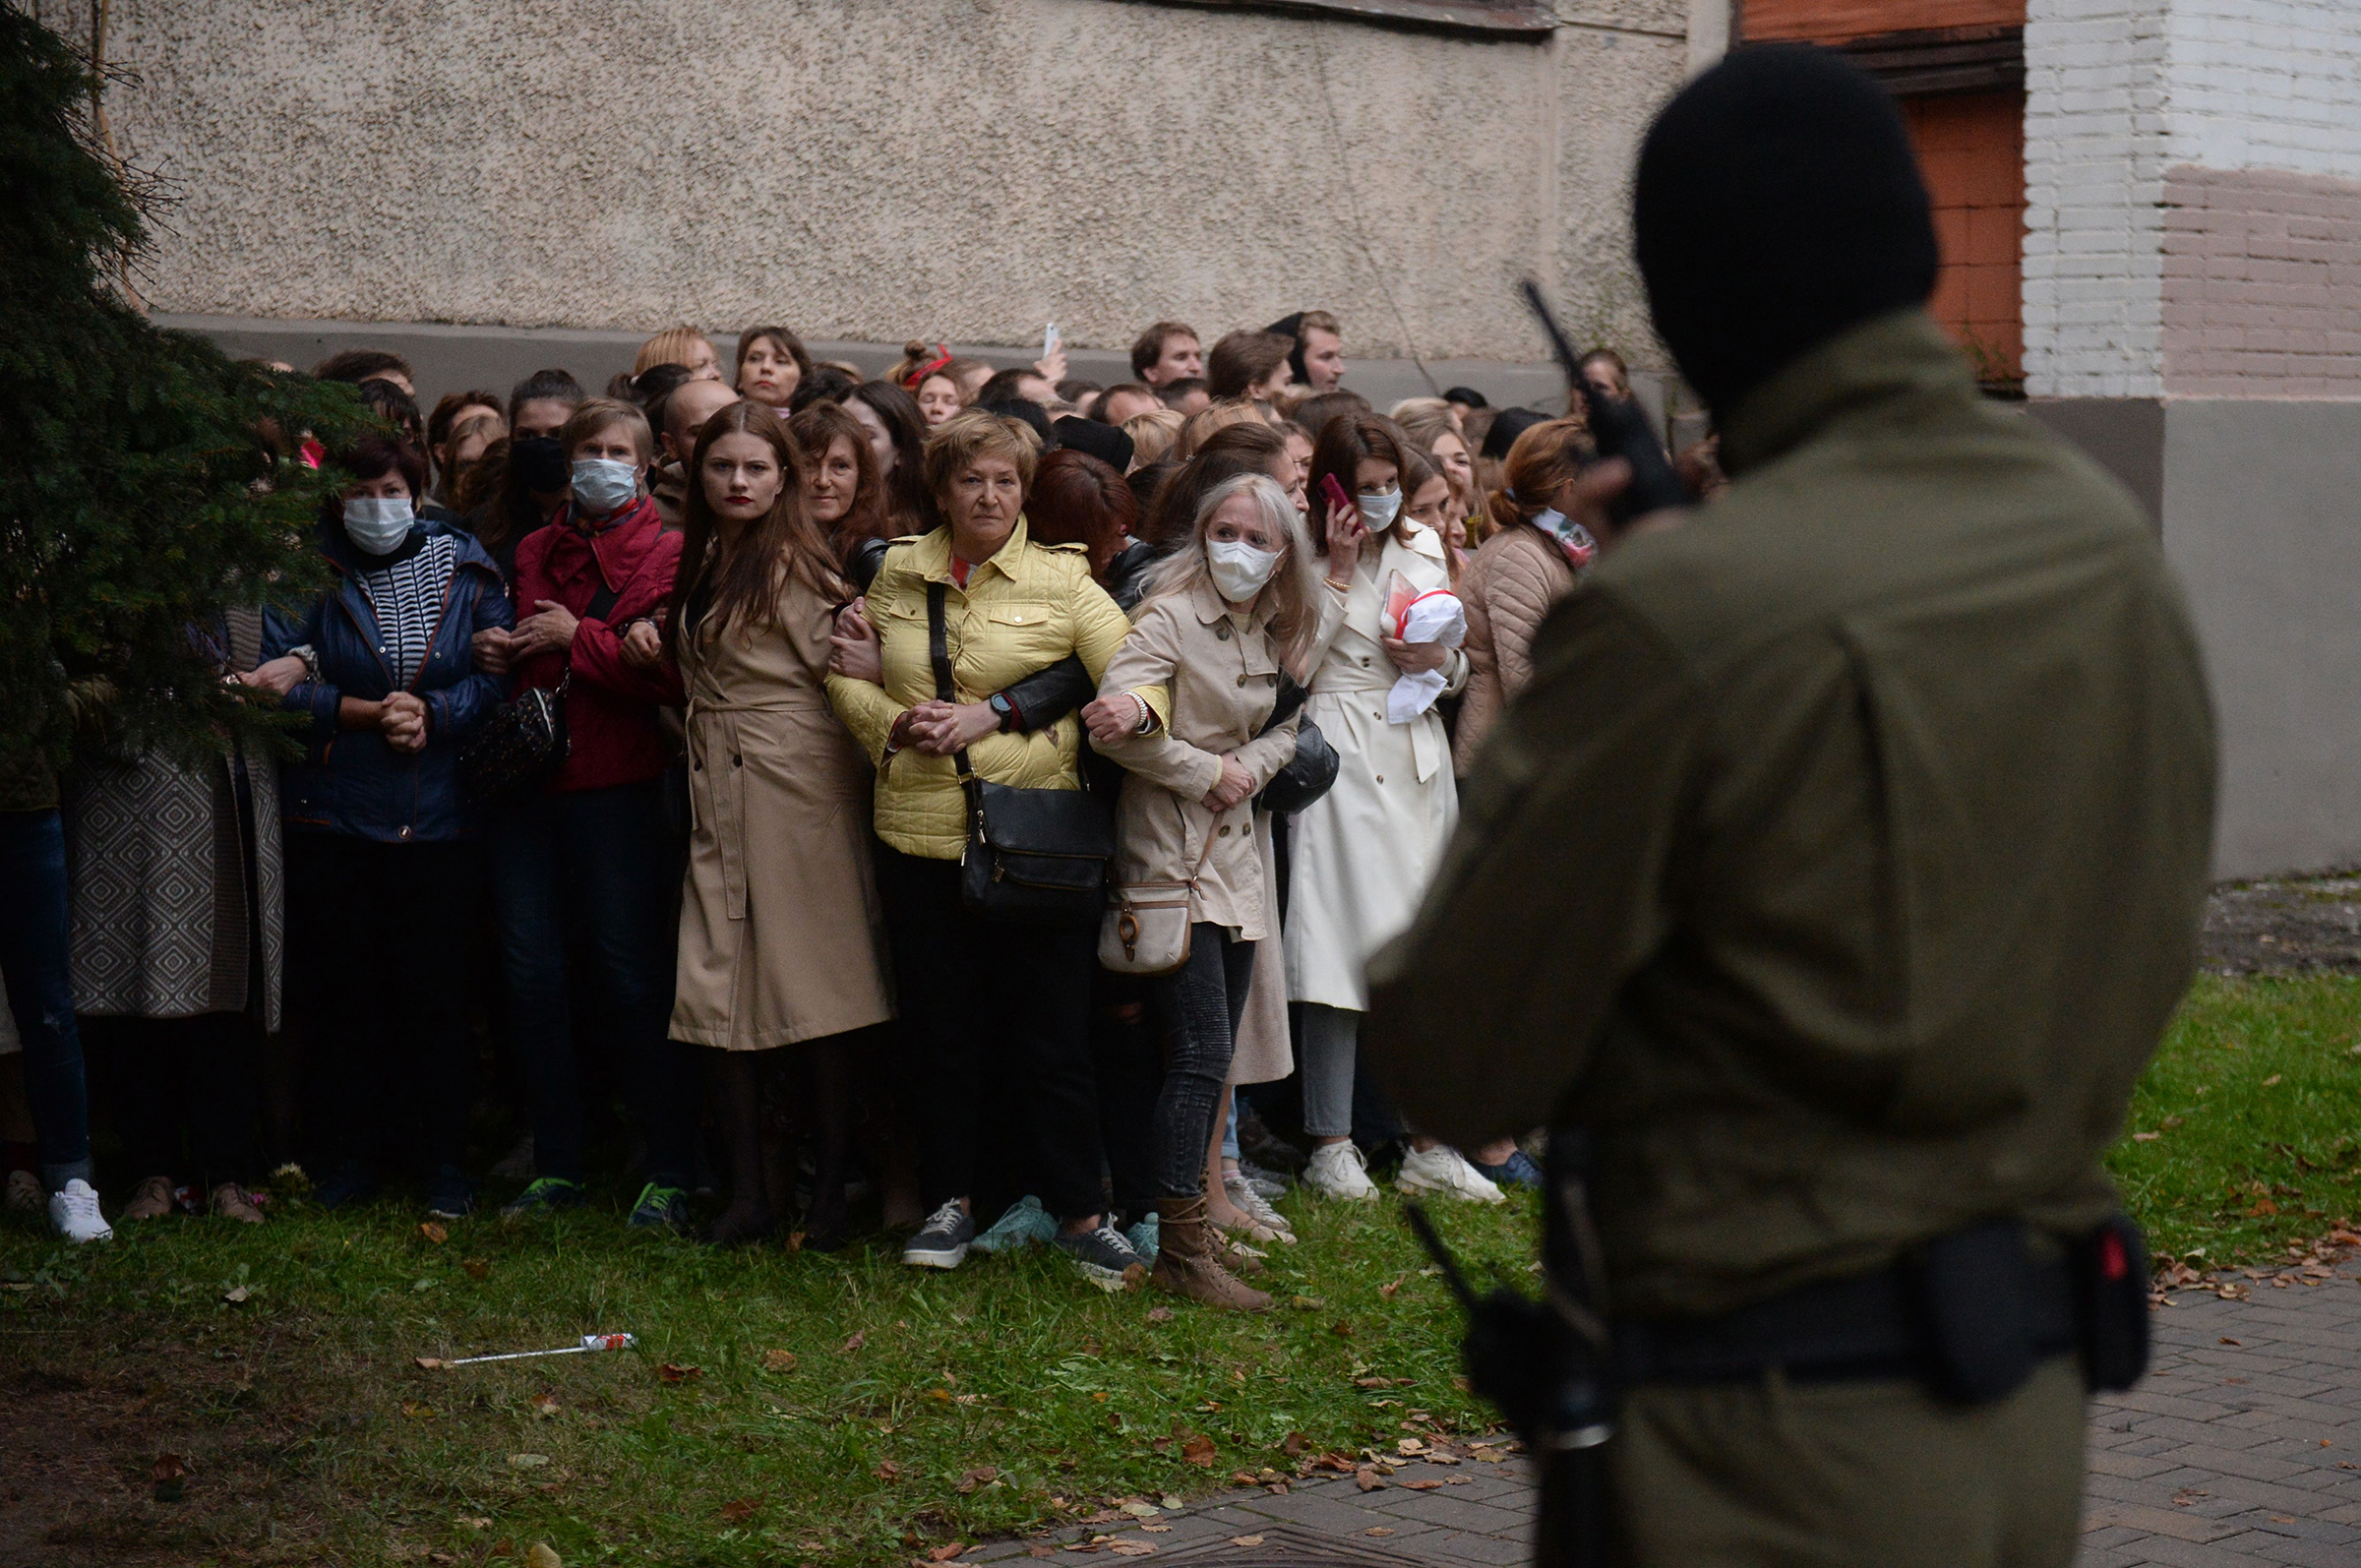 Activists resist an attempt by police to detain them while gathering to support opposition leader Maria Kolesnikova, who had been reportedly detained by state security agents, in Minsk on Sept. 8 2020.